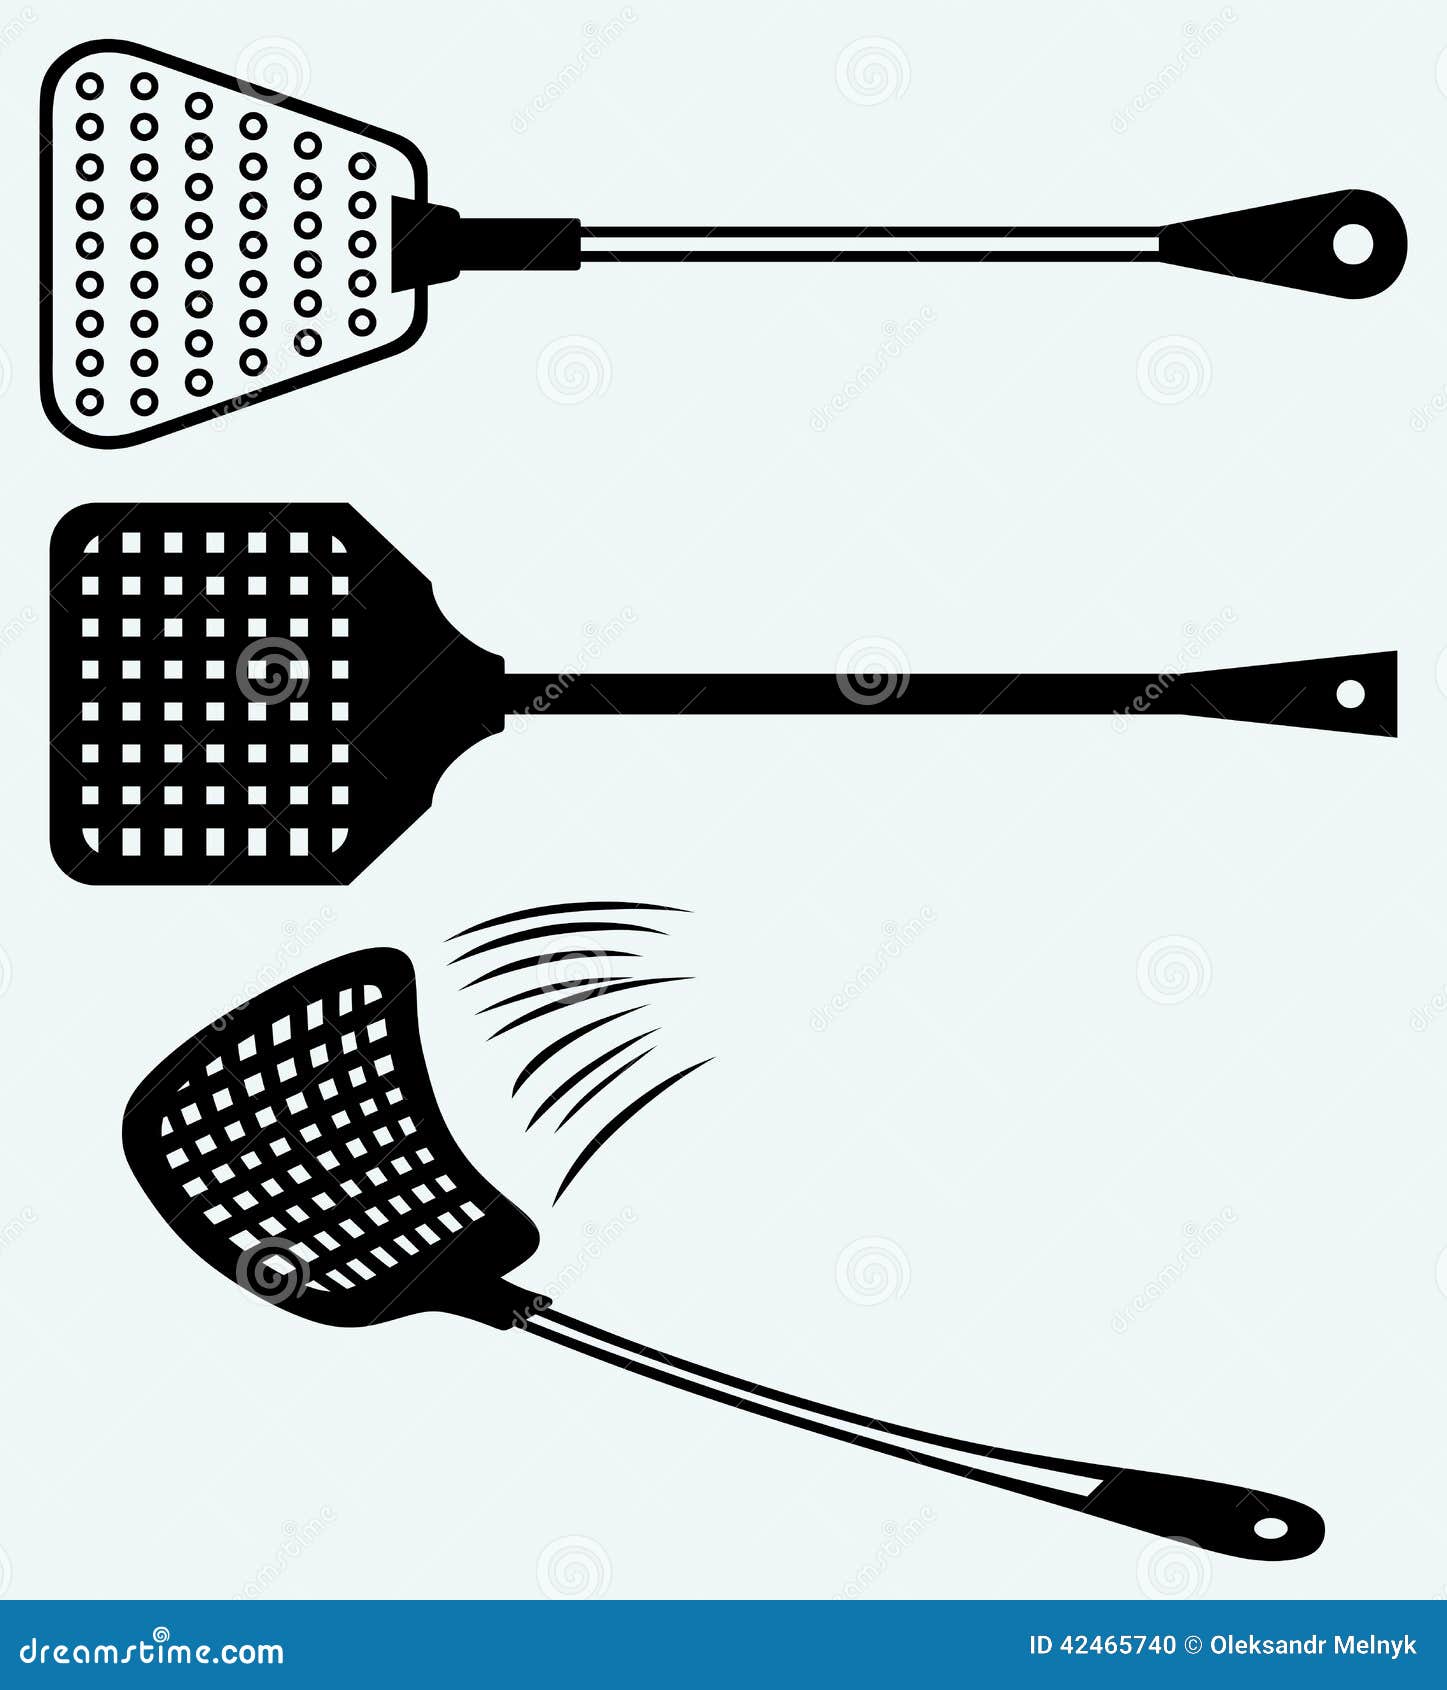 fly swatter clipart - photo #13